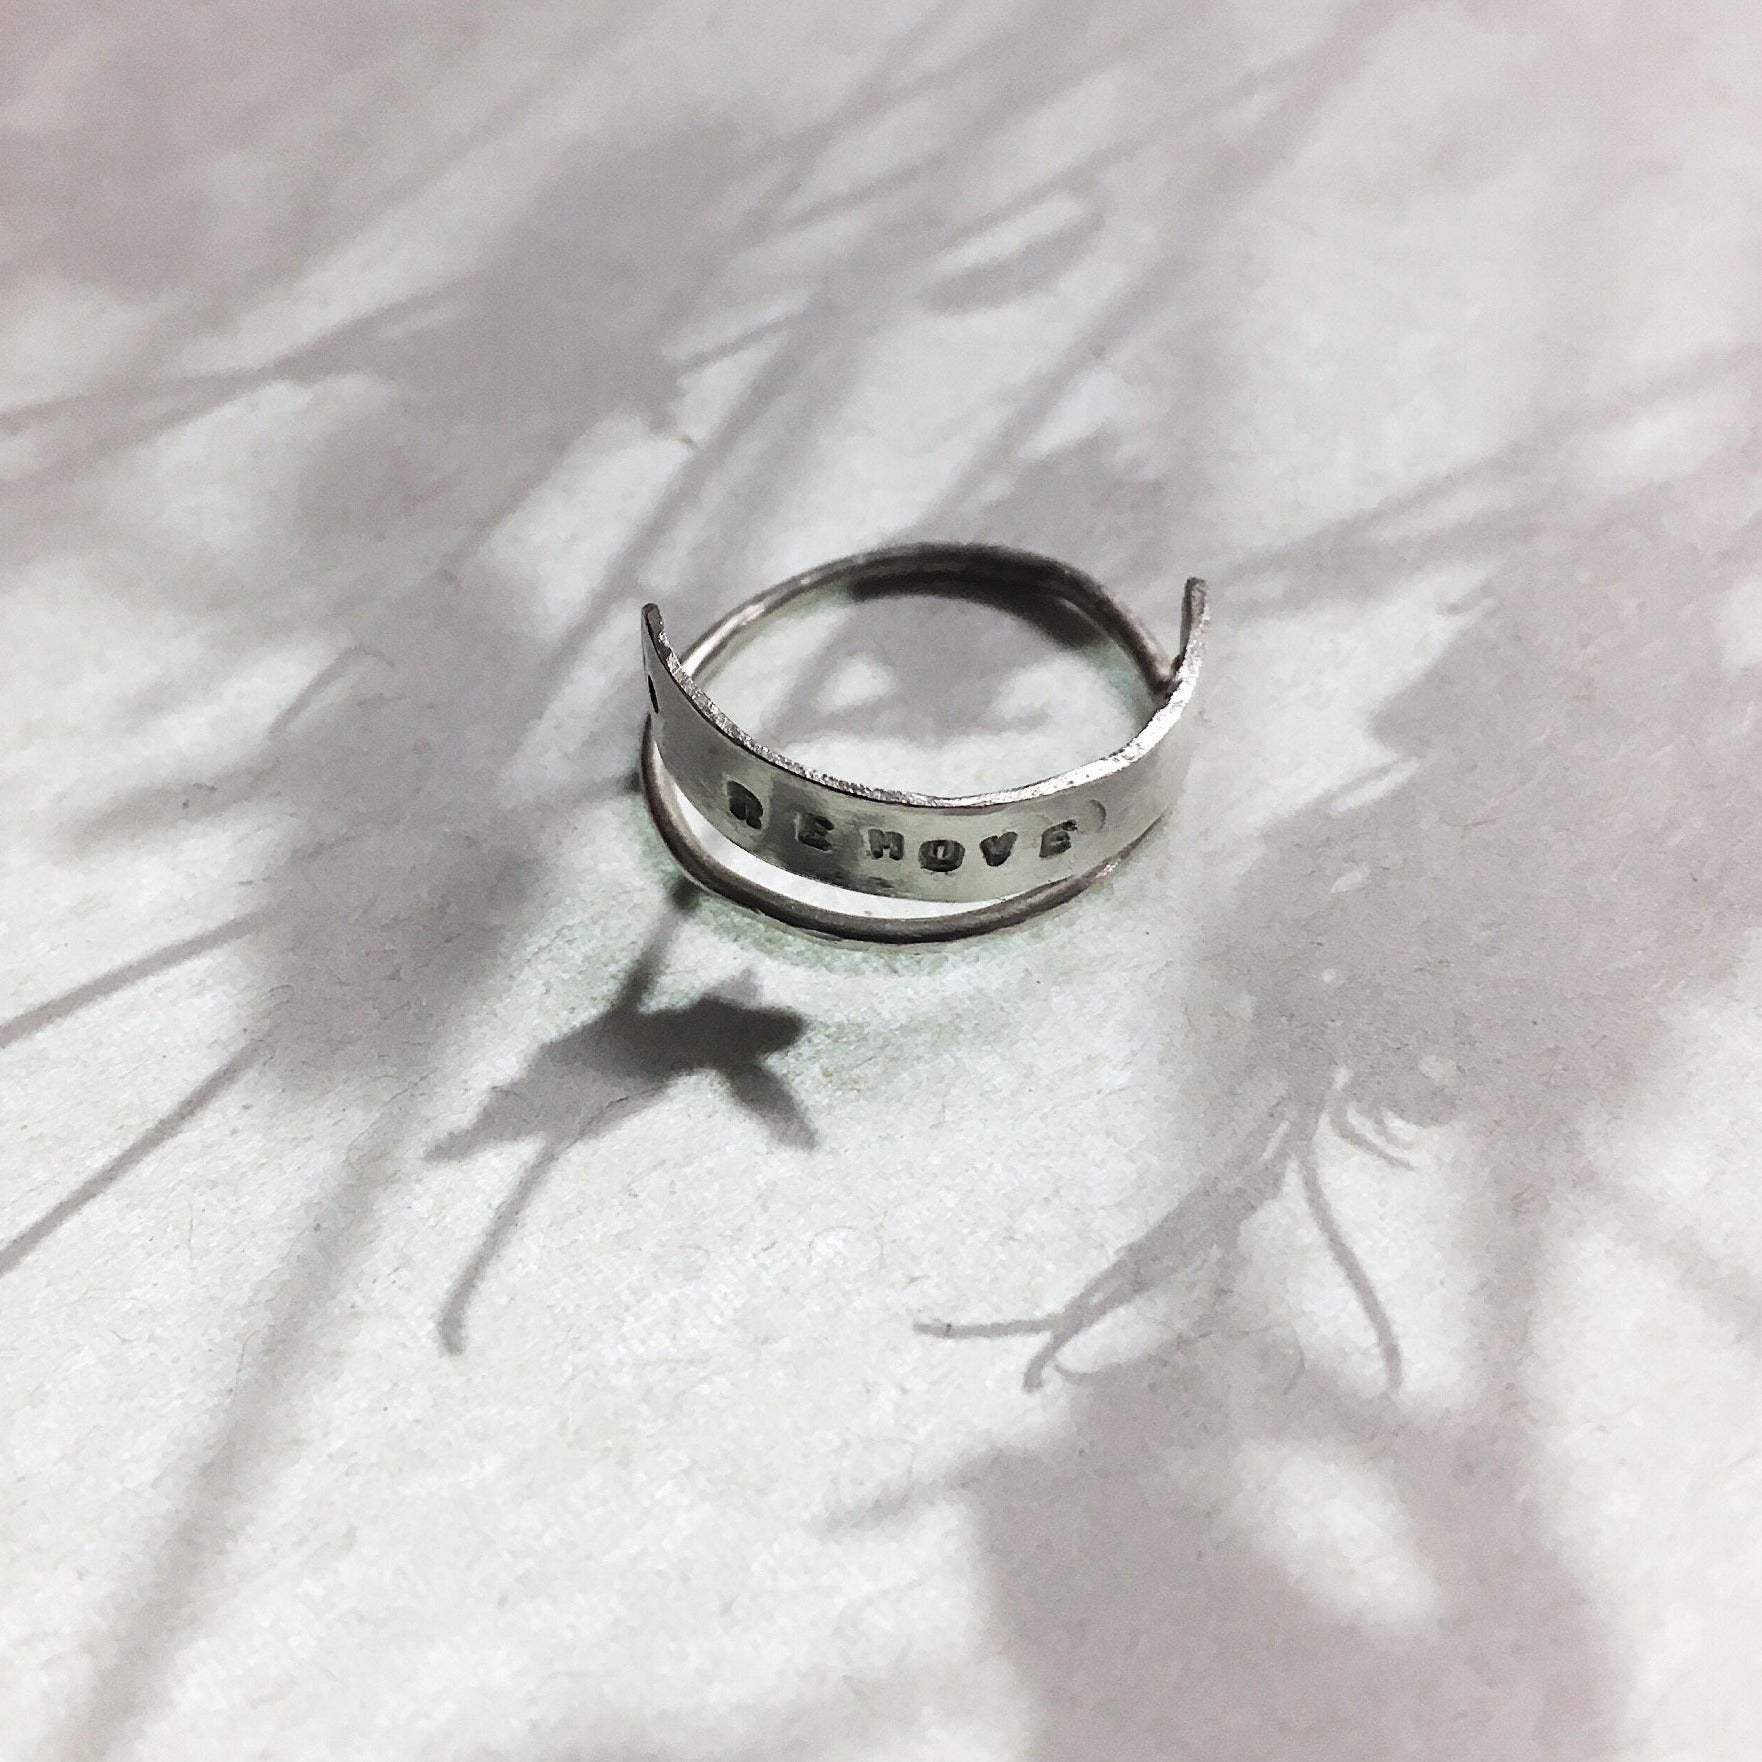 The Irony set ring 'Remove'  double ring